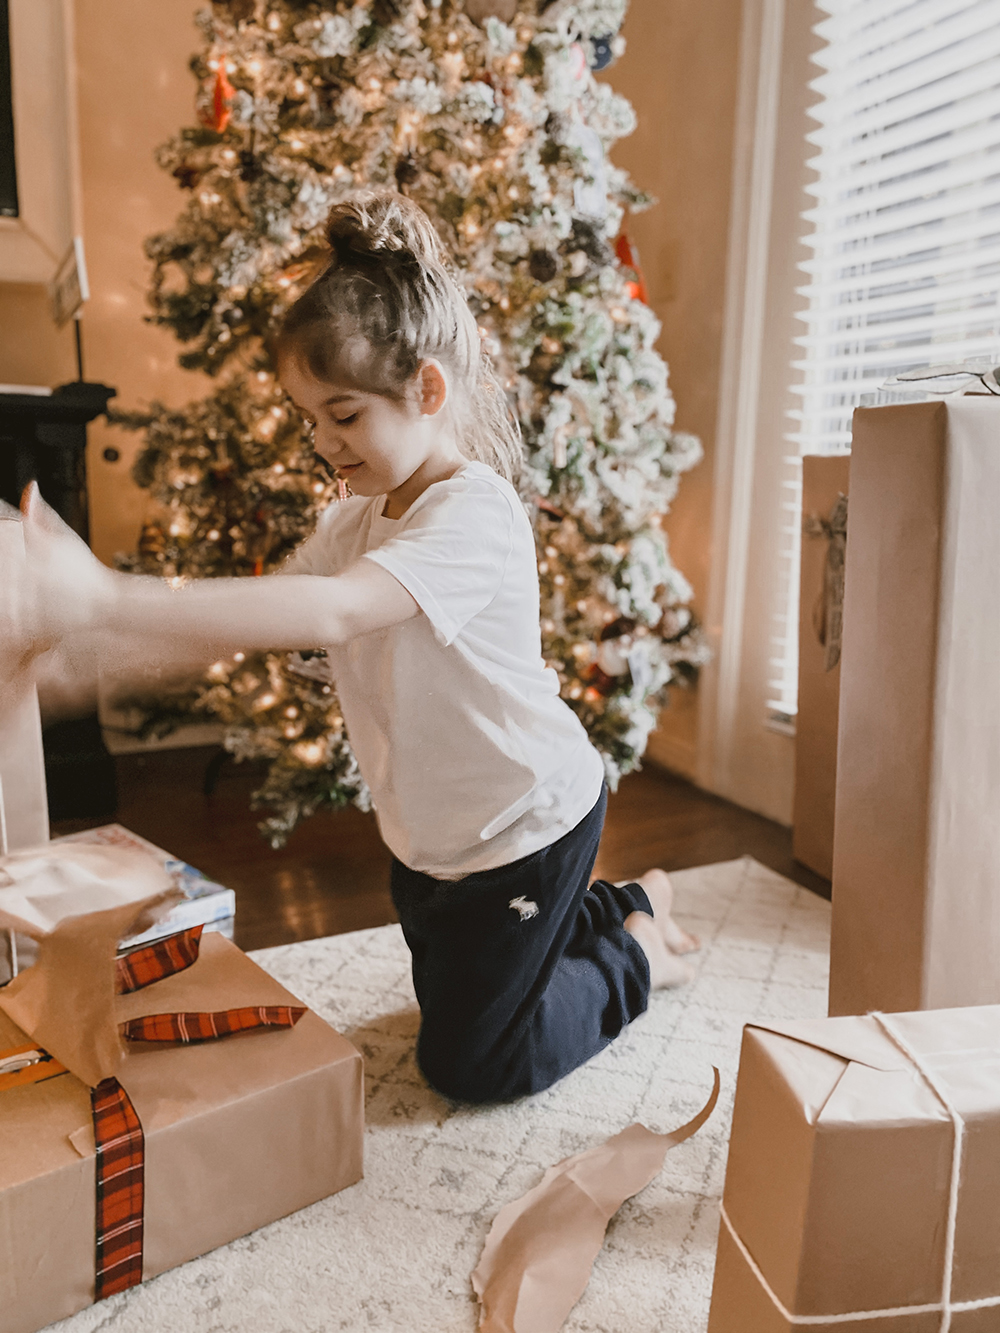 The unforseen effort of those holiday memories and more tales of motherhood. Sharing a recap of our Christmas and why I am playing the long term game when it comes to cultivating those warm and comforting childhood memories.